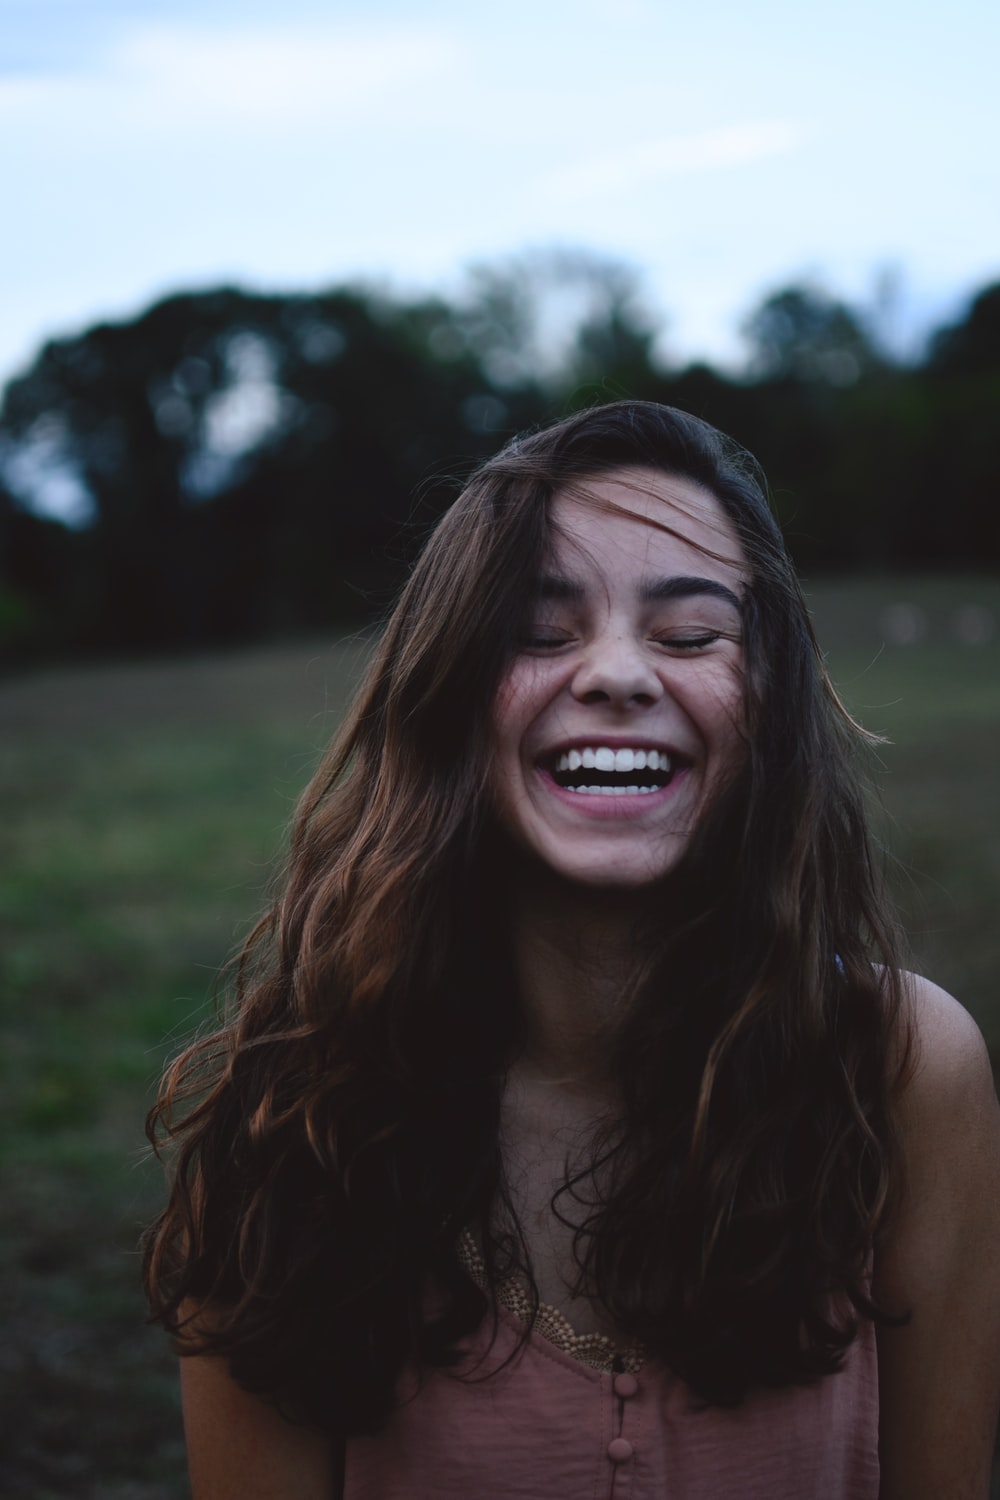 Woman Laughing Picture [HQ]. Download Free Image